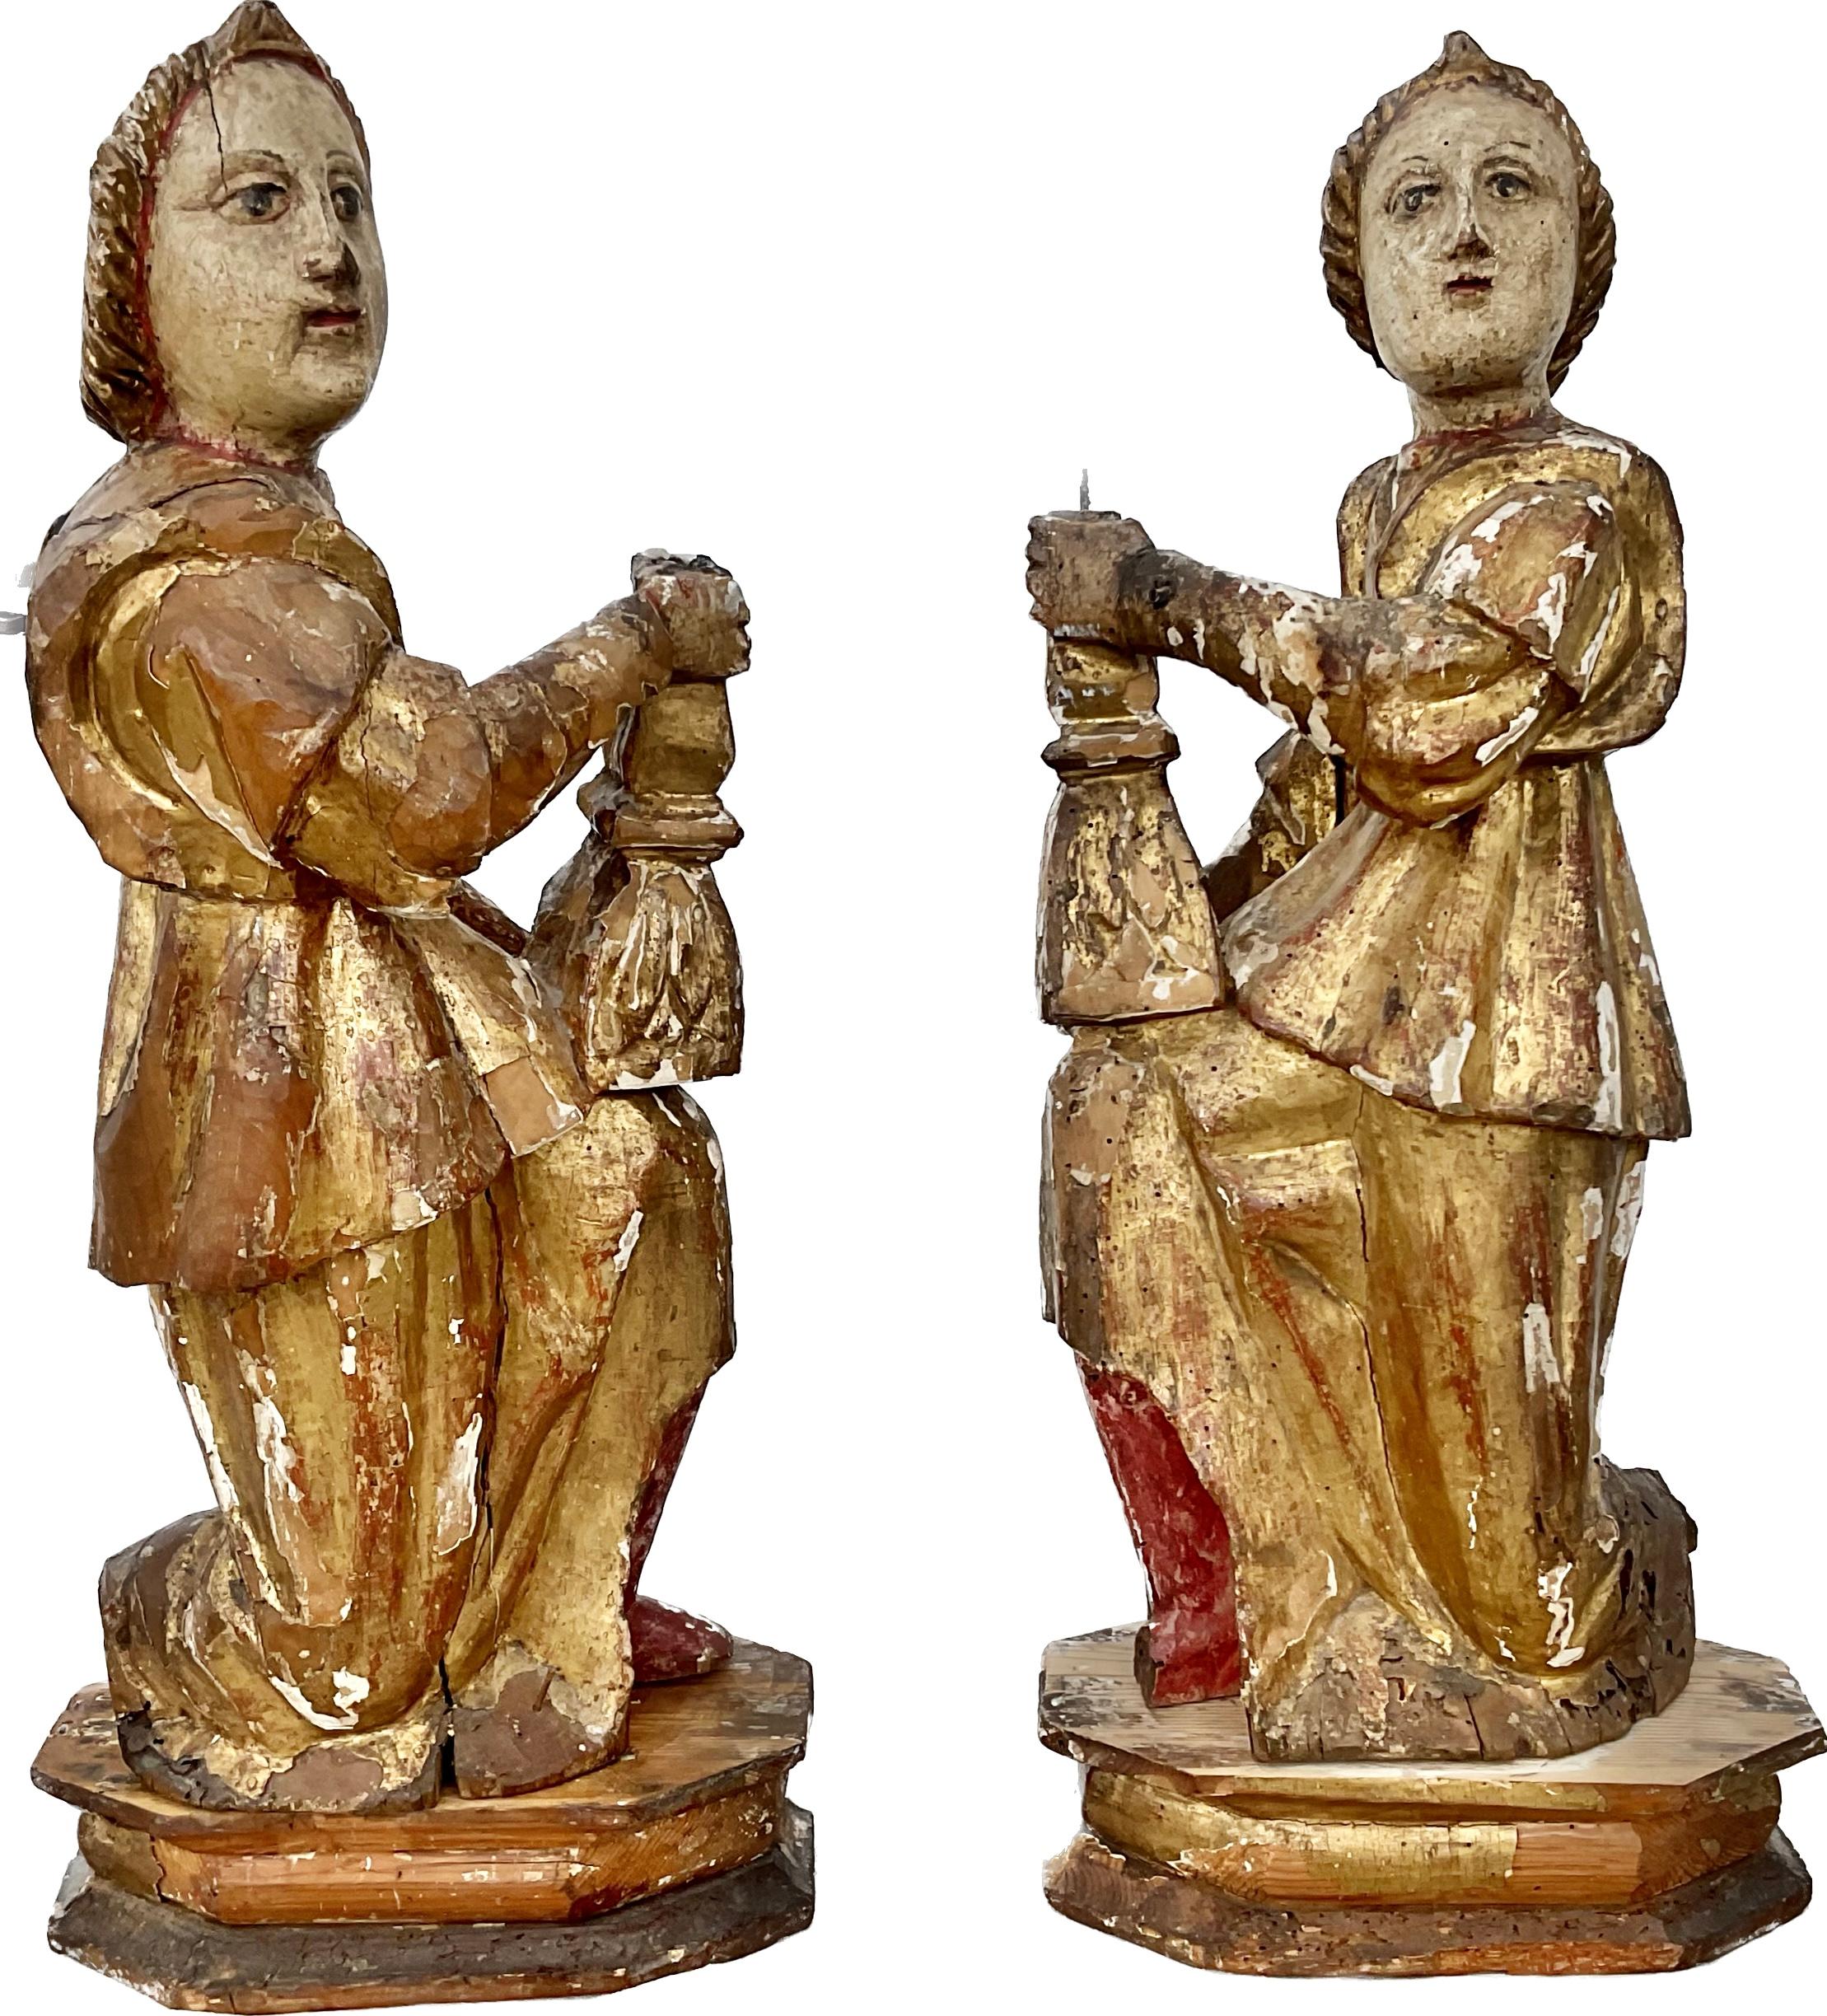 Stunning and rare pair of 16th century Italian candle bearing Angel candlesticks depicting male and a female figures from the renaissance period. Each figure is meticulously carved from wood and adorned with opulent gold gilding and polychrome